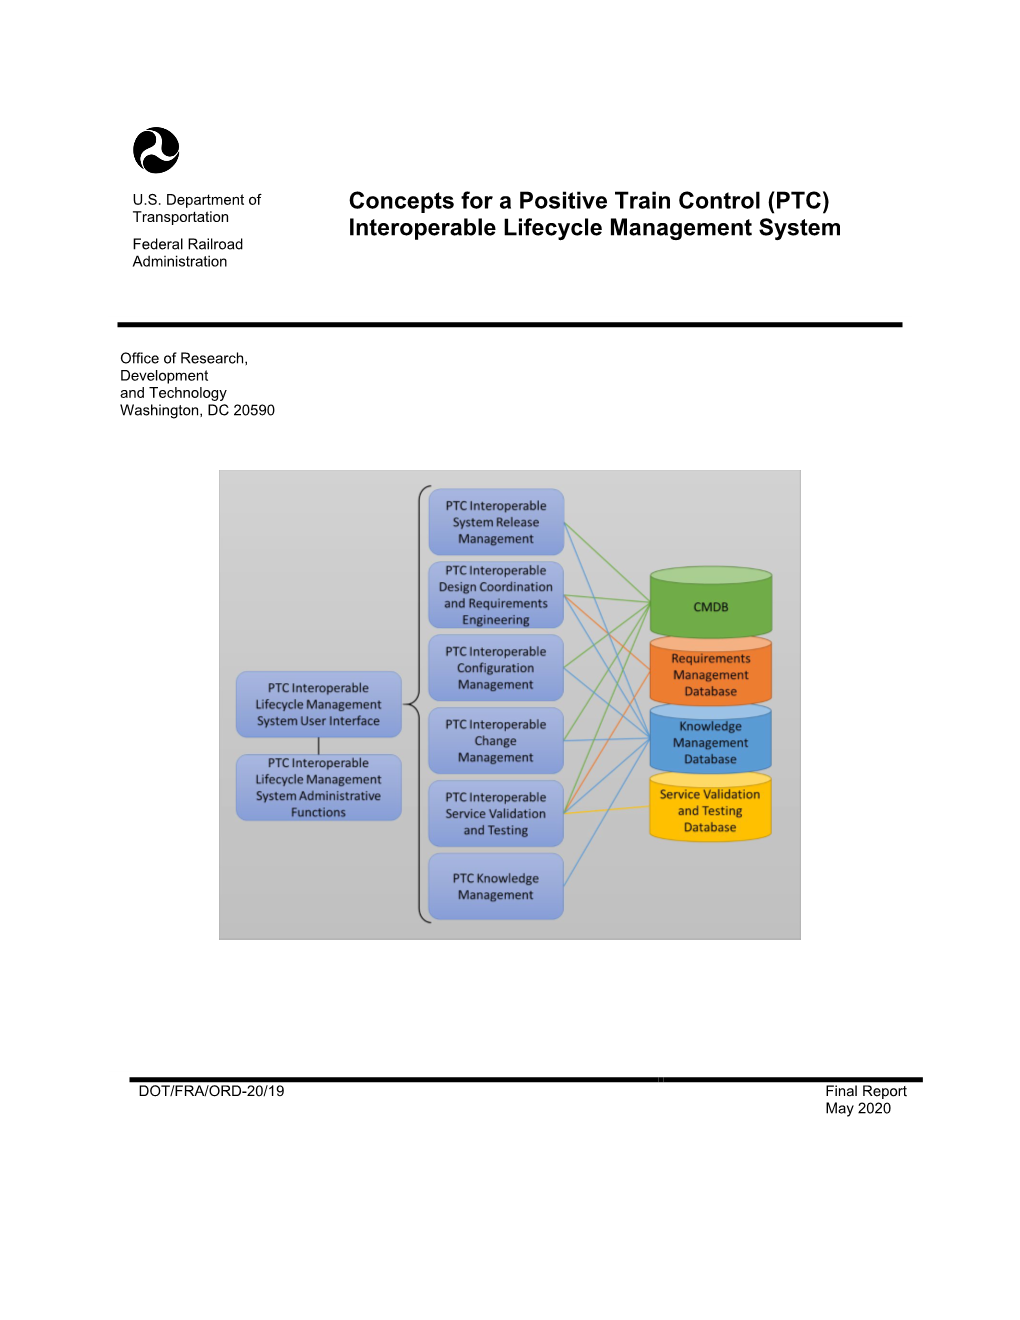 Concepts for Interoperable Lifecycle Management of Positive Train Control (PTC) DTFR53-11-D-00008